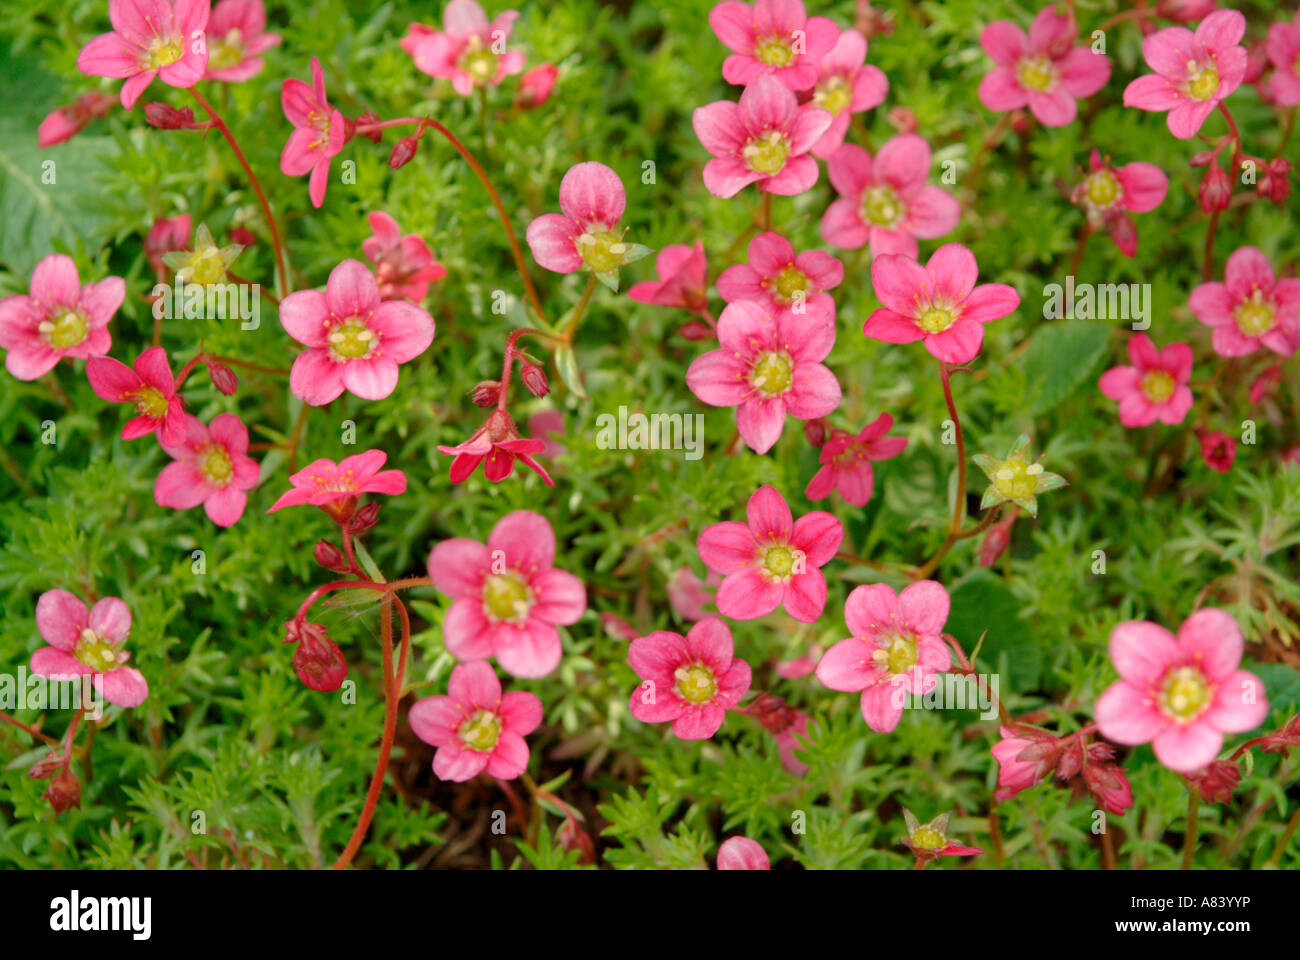 The pink flowers of the Saxifraga arendsii Stock Photo